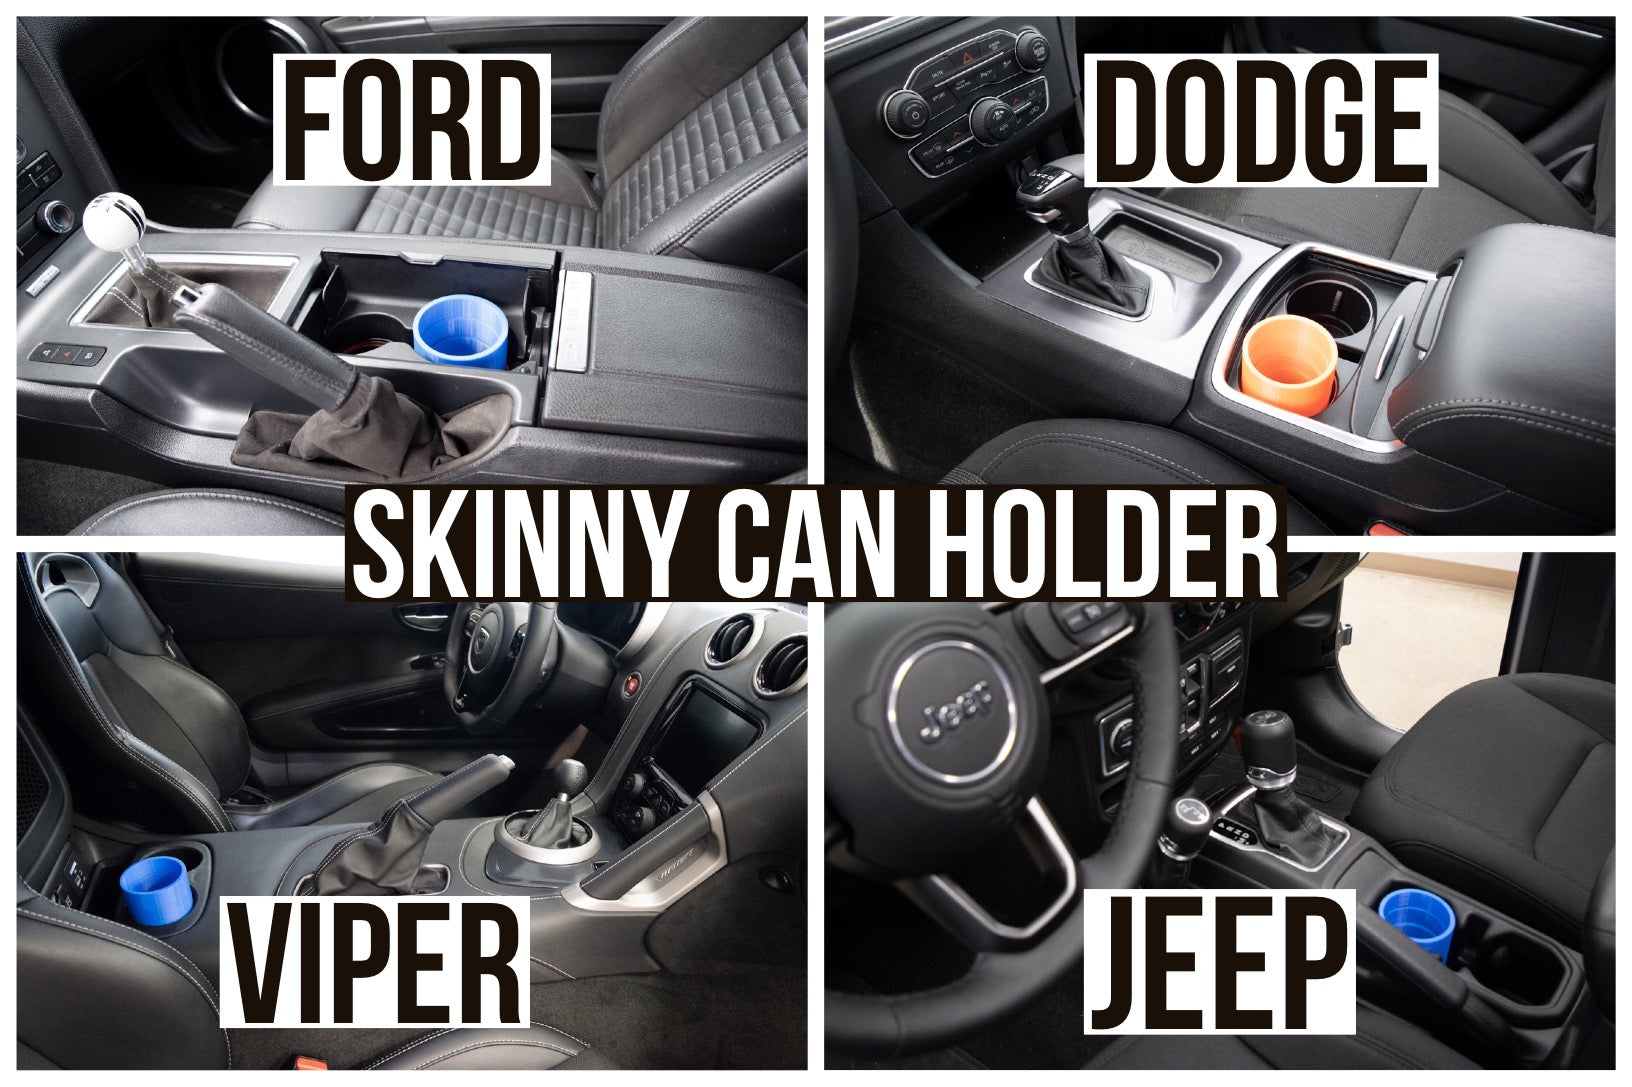 Skinny Can Holder adapter for ford dodge viper jeep any car